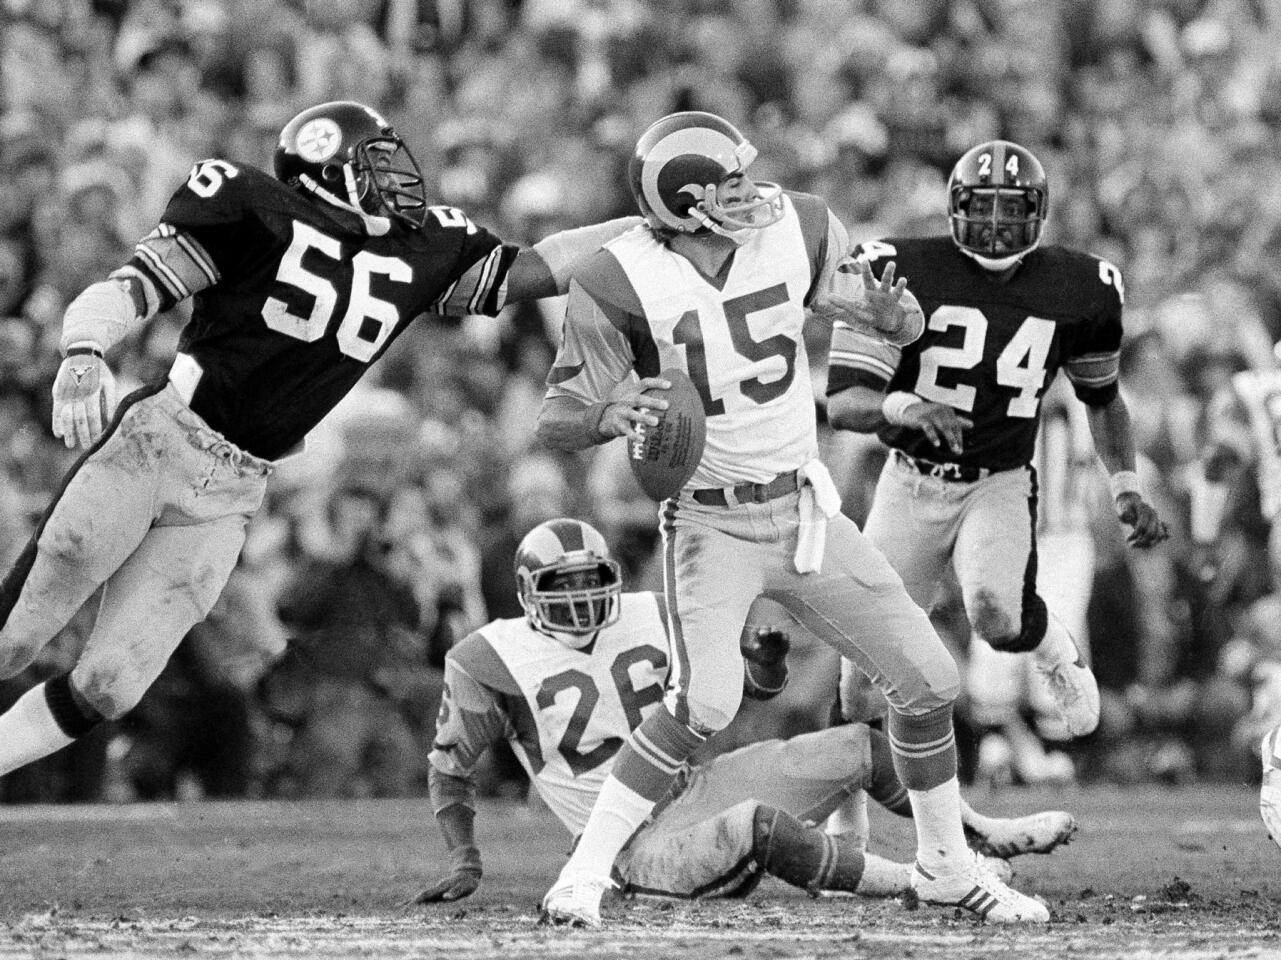 Rams quarterback Vince Ferragamo (15) prepares to pass but never gets the ball past Steelers' Robin Cole (56), during Super Bowl XIV action at the Rose Bowl in Pasadena on Jan. 21, 1980. Ferragamo is sacked on the play. The Rams lost to the Steelers, 31-19.